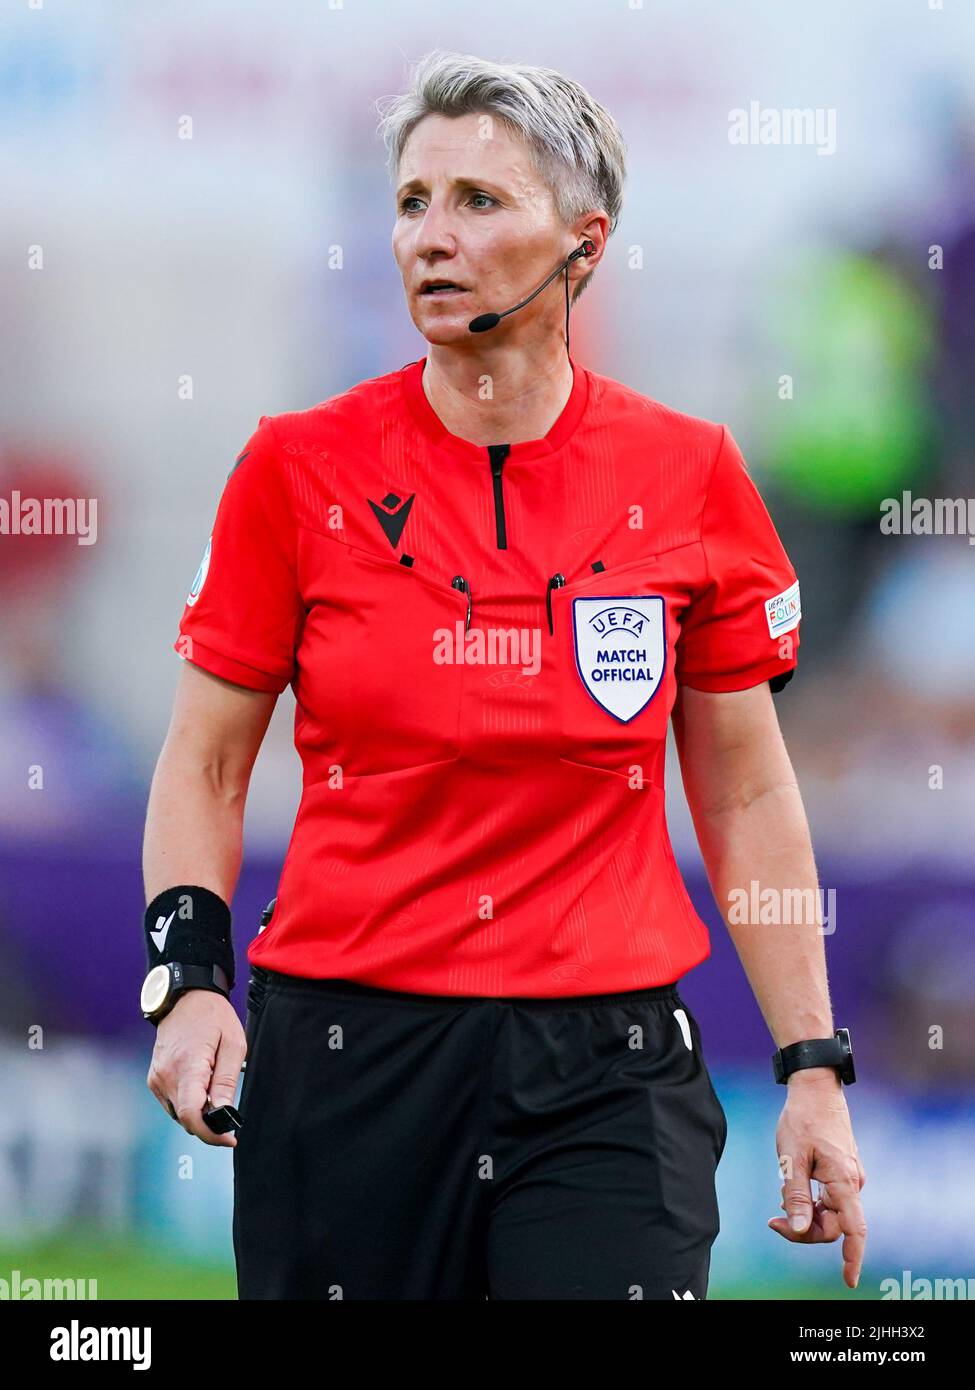 ROTHERHAM, UNITED KINGDOM - JULY 18: referee Jana Adamkova (CZE) during the Group D - UEFA Women's EURO 2022 match between Iceland and France at New York Stadium on July 18, 2022 in Rotherham, United Kingdom (Photo by Joris Verwijst/Orange Pictures) Stock Photo